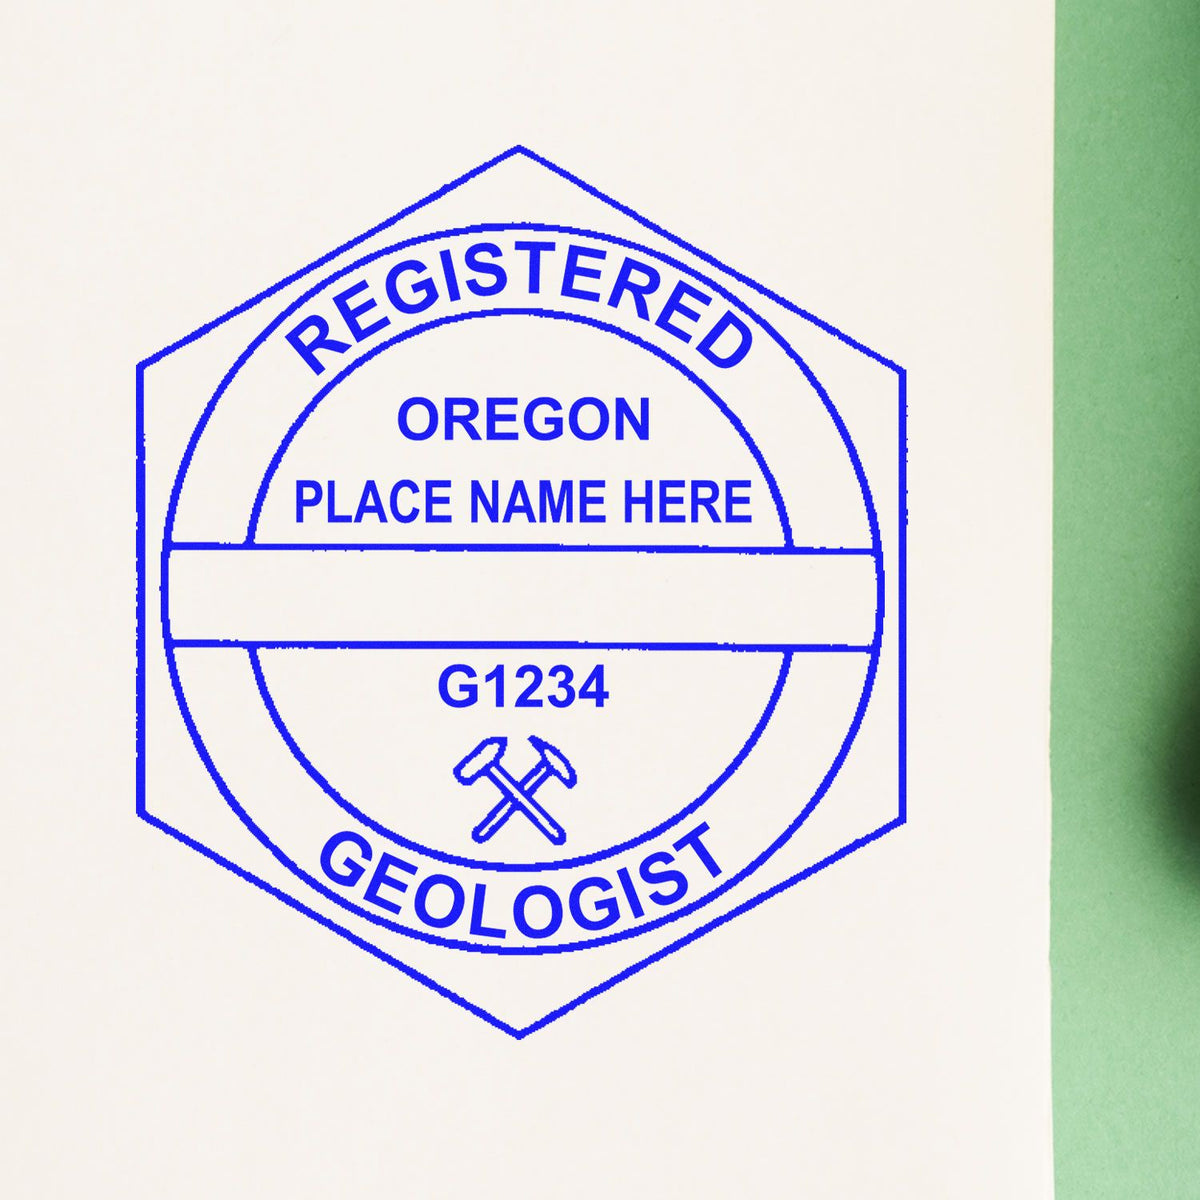 An alternative view of the Digital Oregon Geologist Stamp, Electronic Seal for Oregon Geologist stamped on a sheet of paper showing the image in use